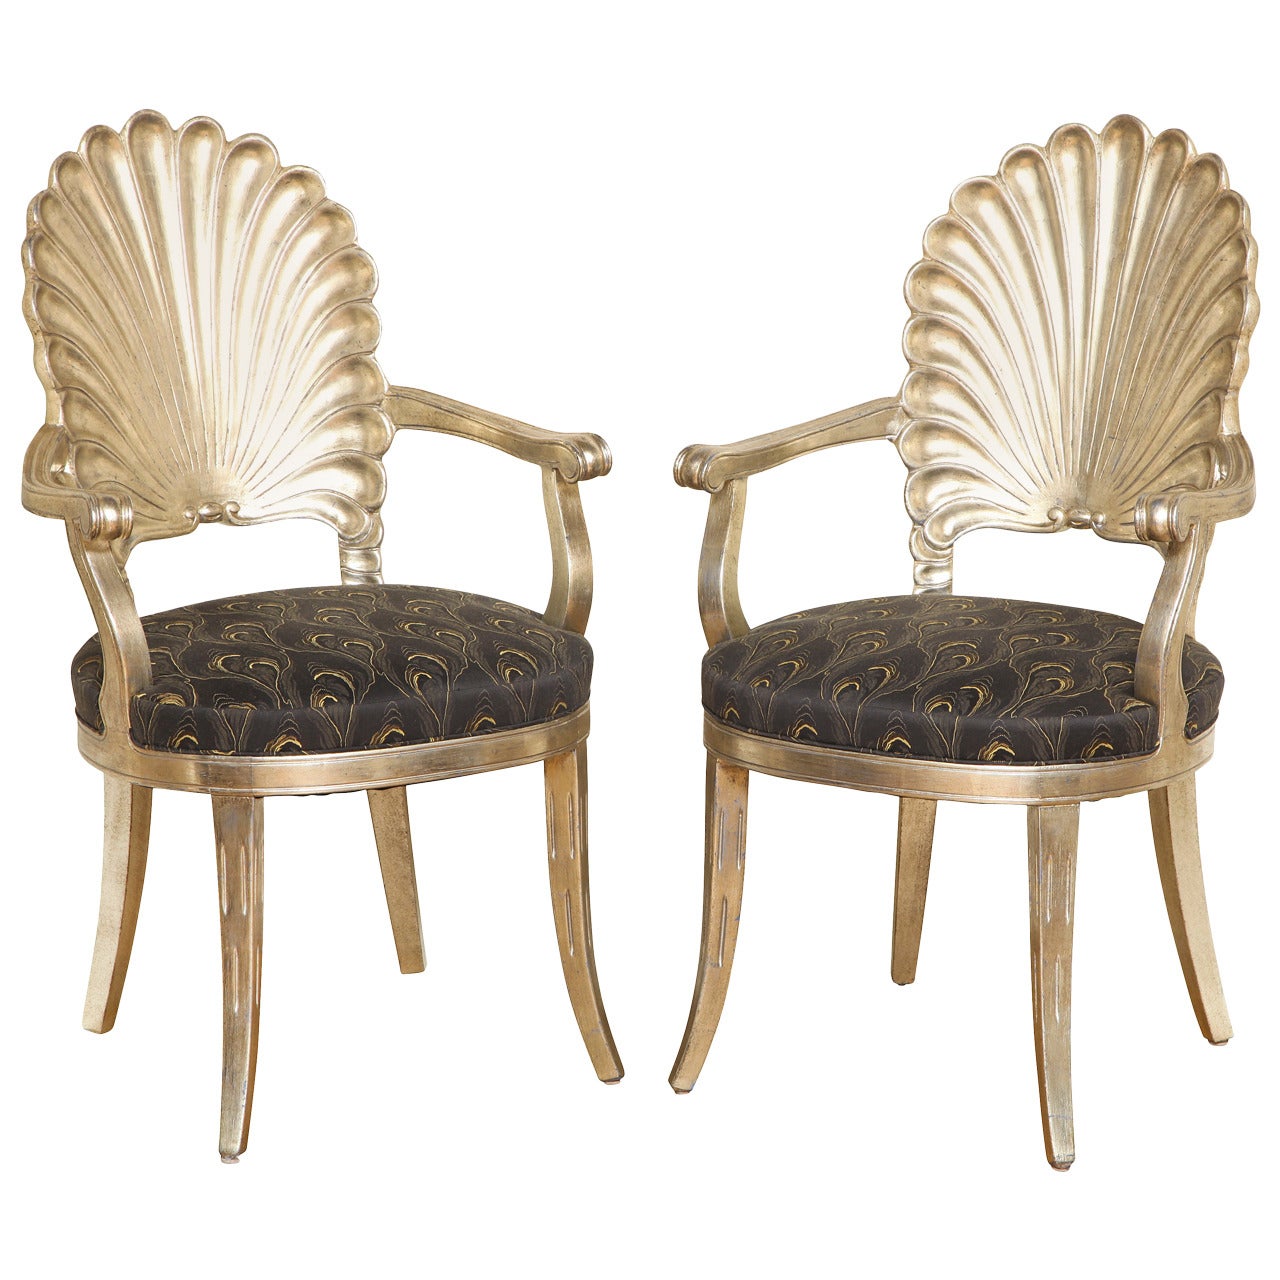 Pair of Carved Shell-Back Chairs